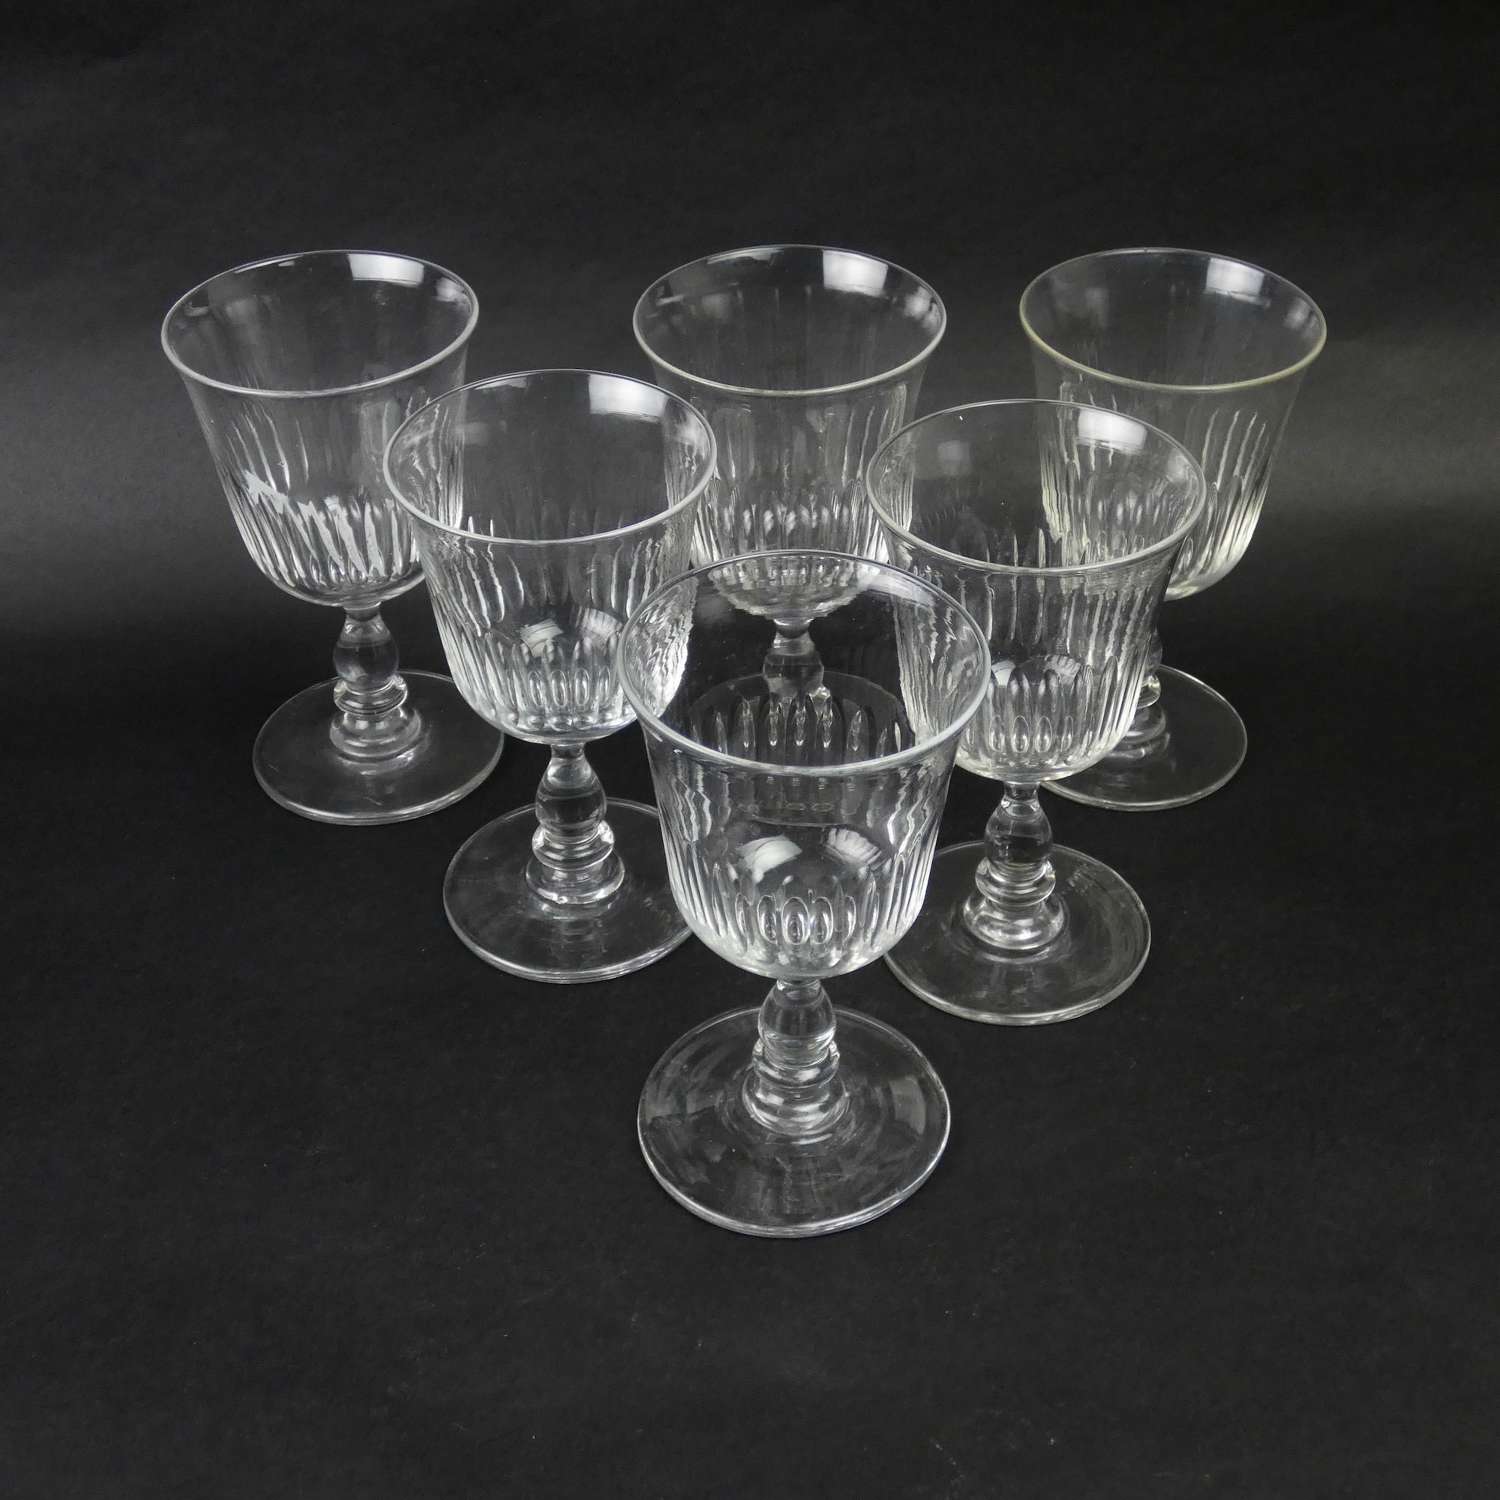 6 crystal wine glasses with baluster stems